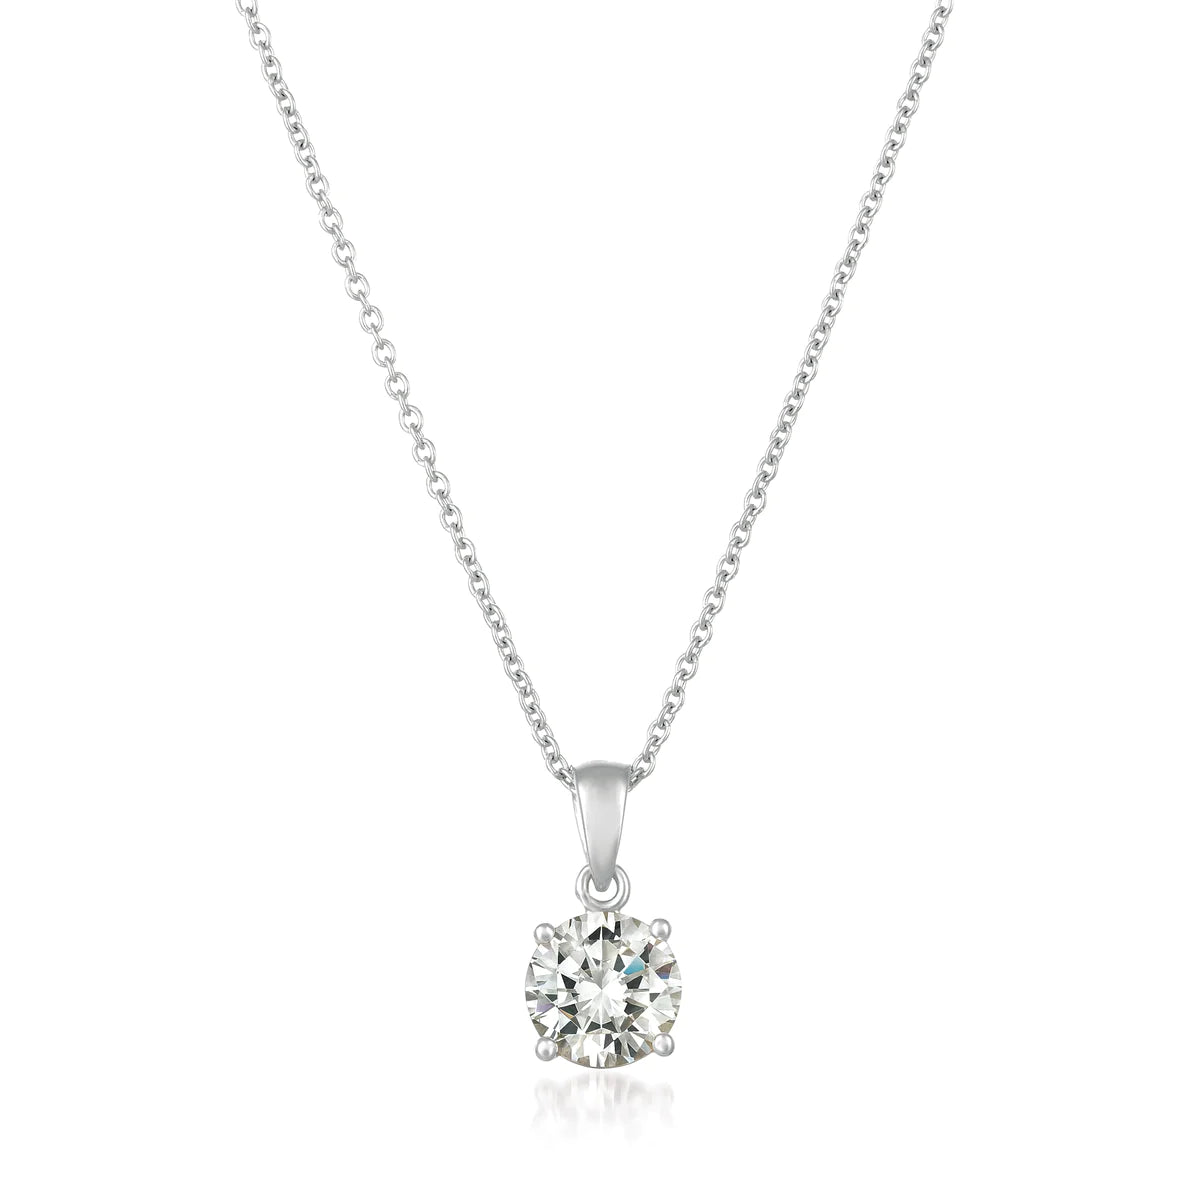 Royal Brilliant Cut Pendant Necklace Finished In Pure Platinum